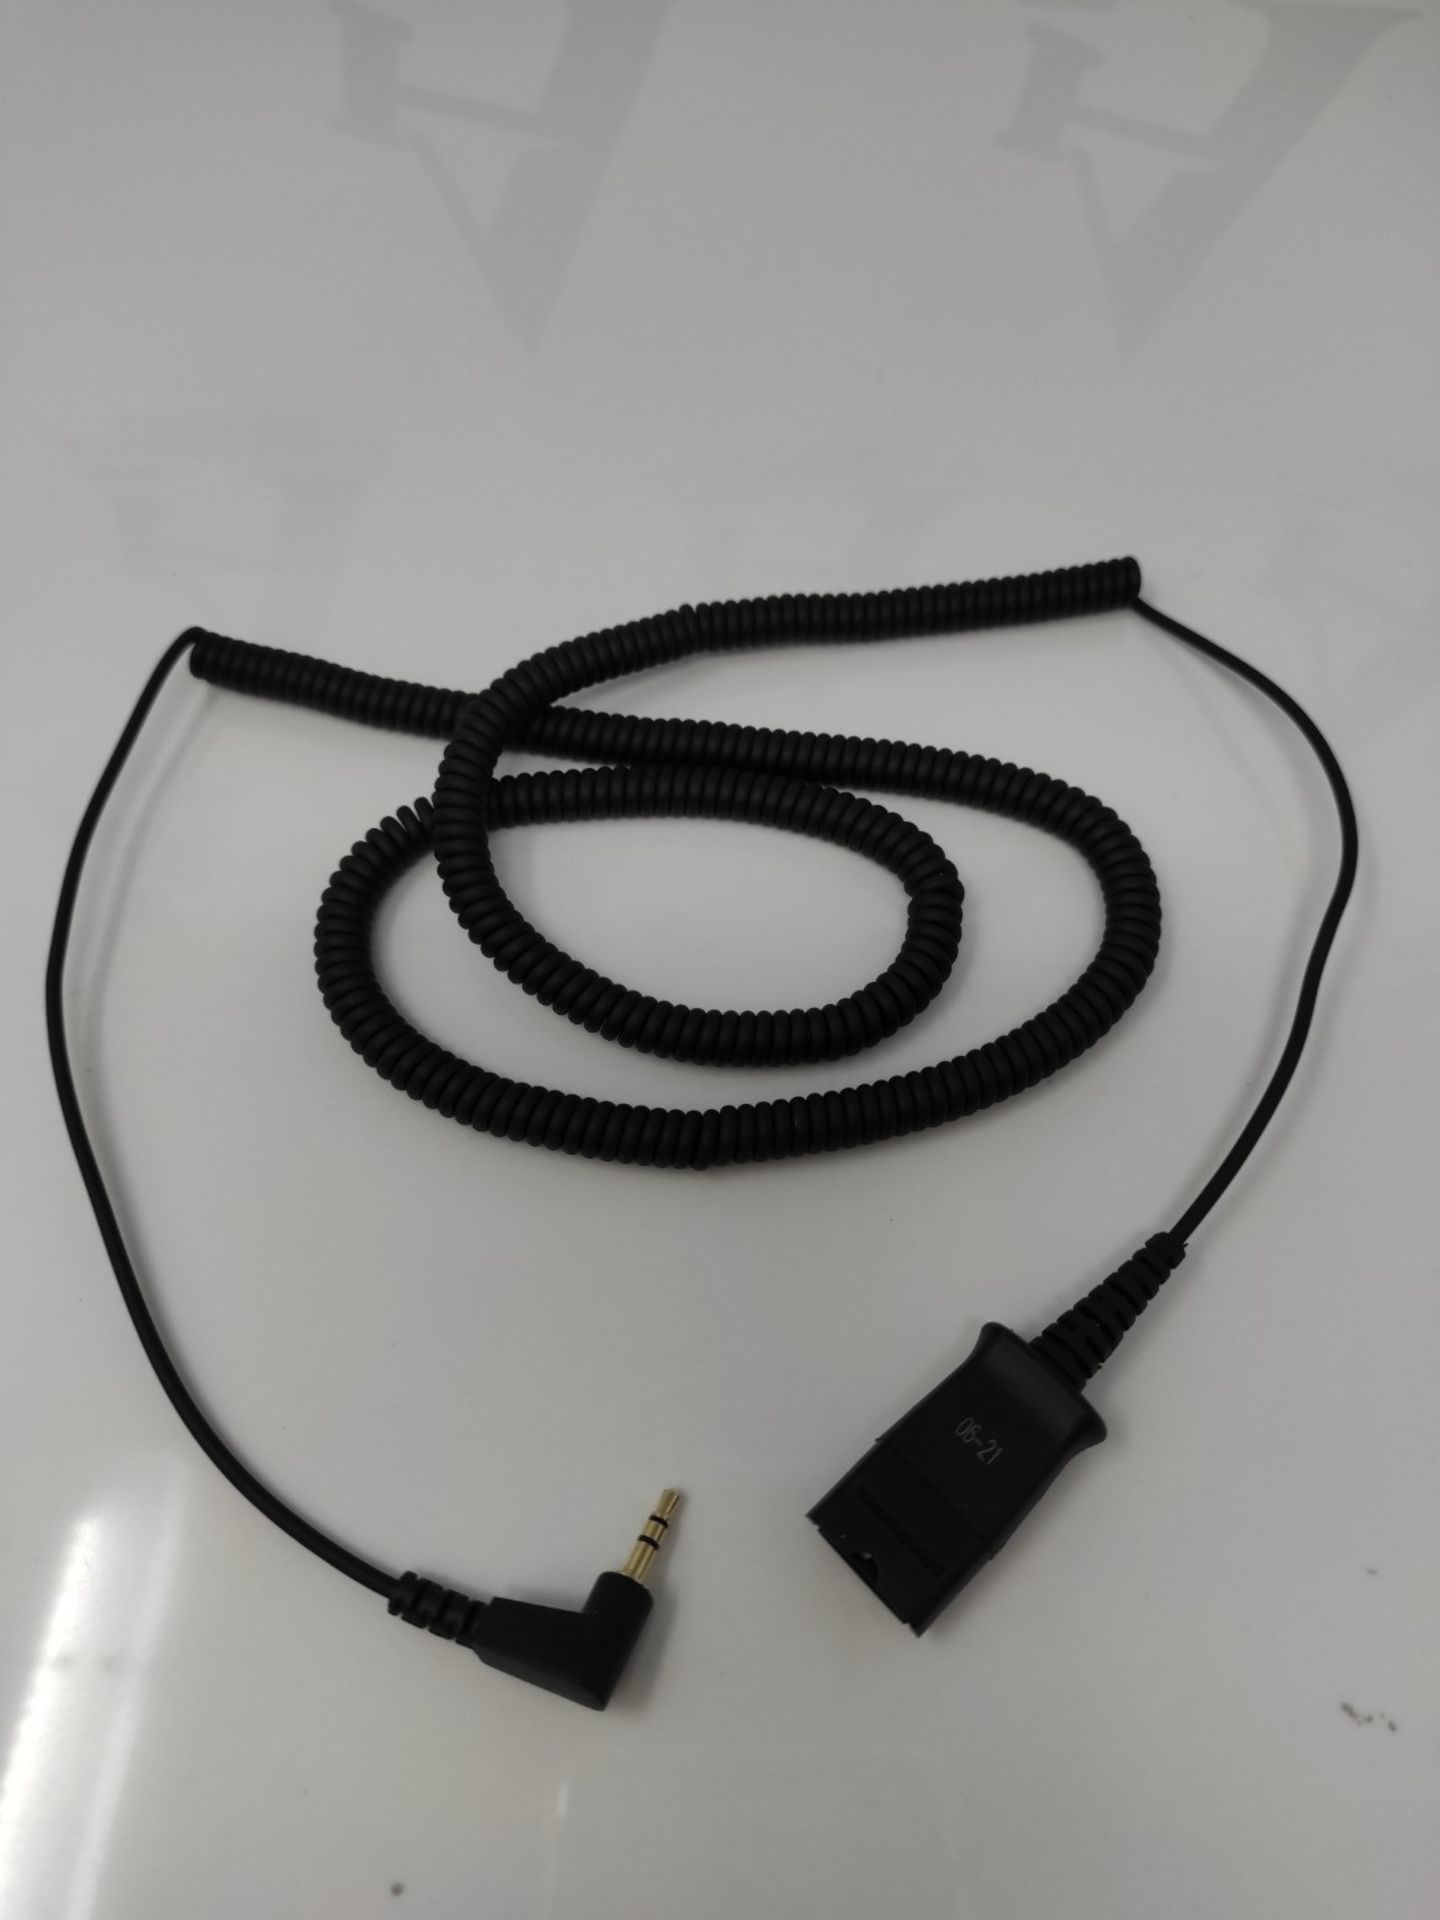 Plantronics 3 m 2.5 mm Quick Disconnect Coil Cord Cable, Black - Image 2 of 2